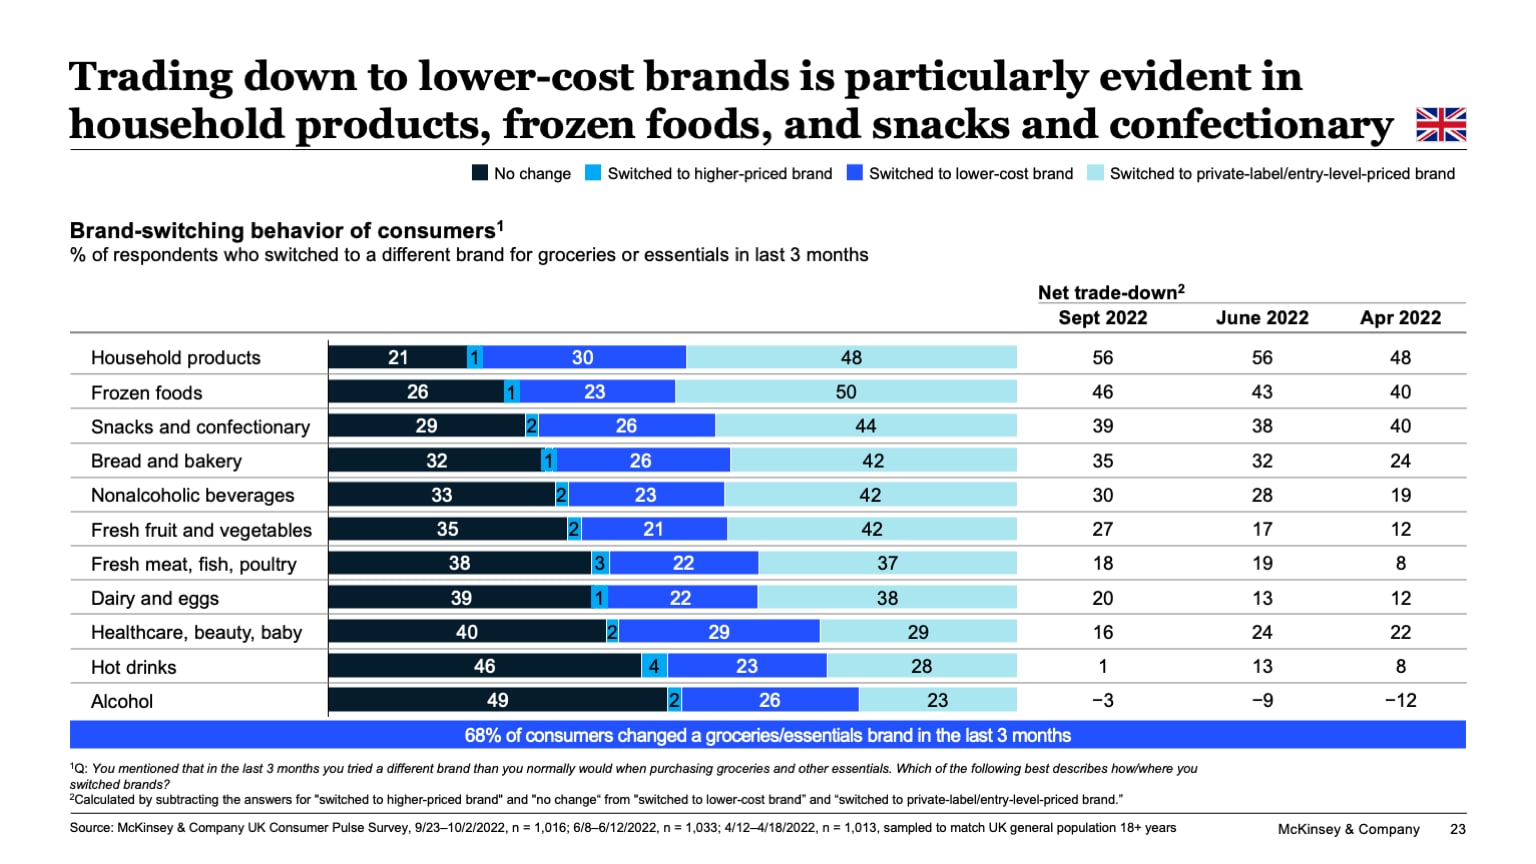 Trading down to lower-cost brands is particularly evident in household products, frozen foods, and snacks and confectionary